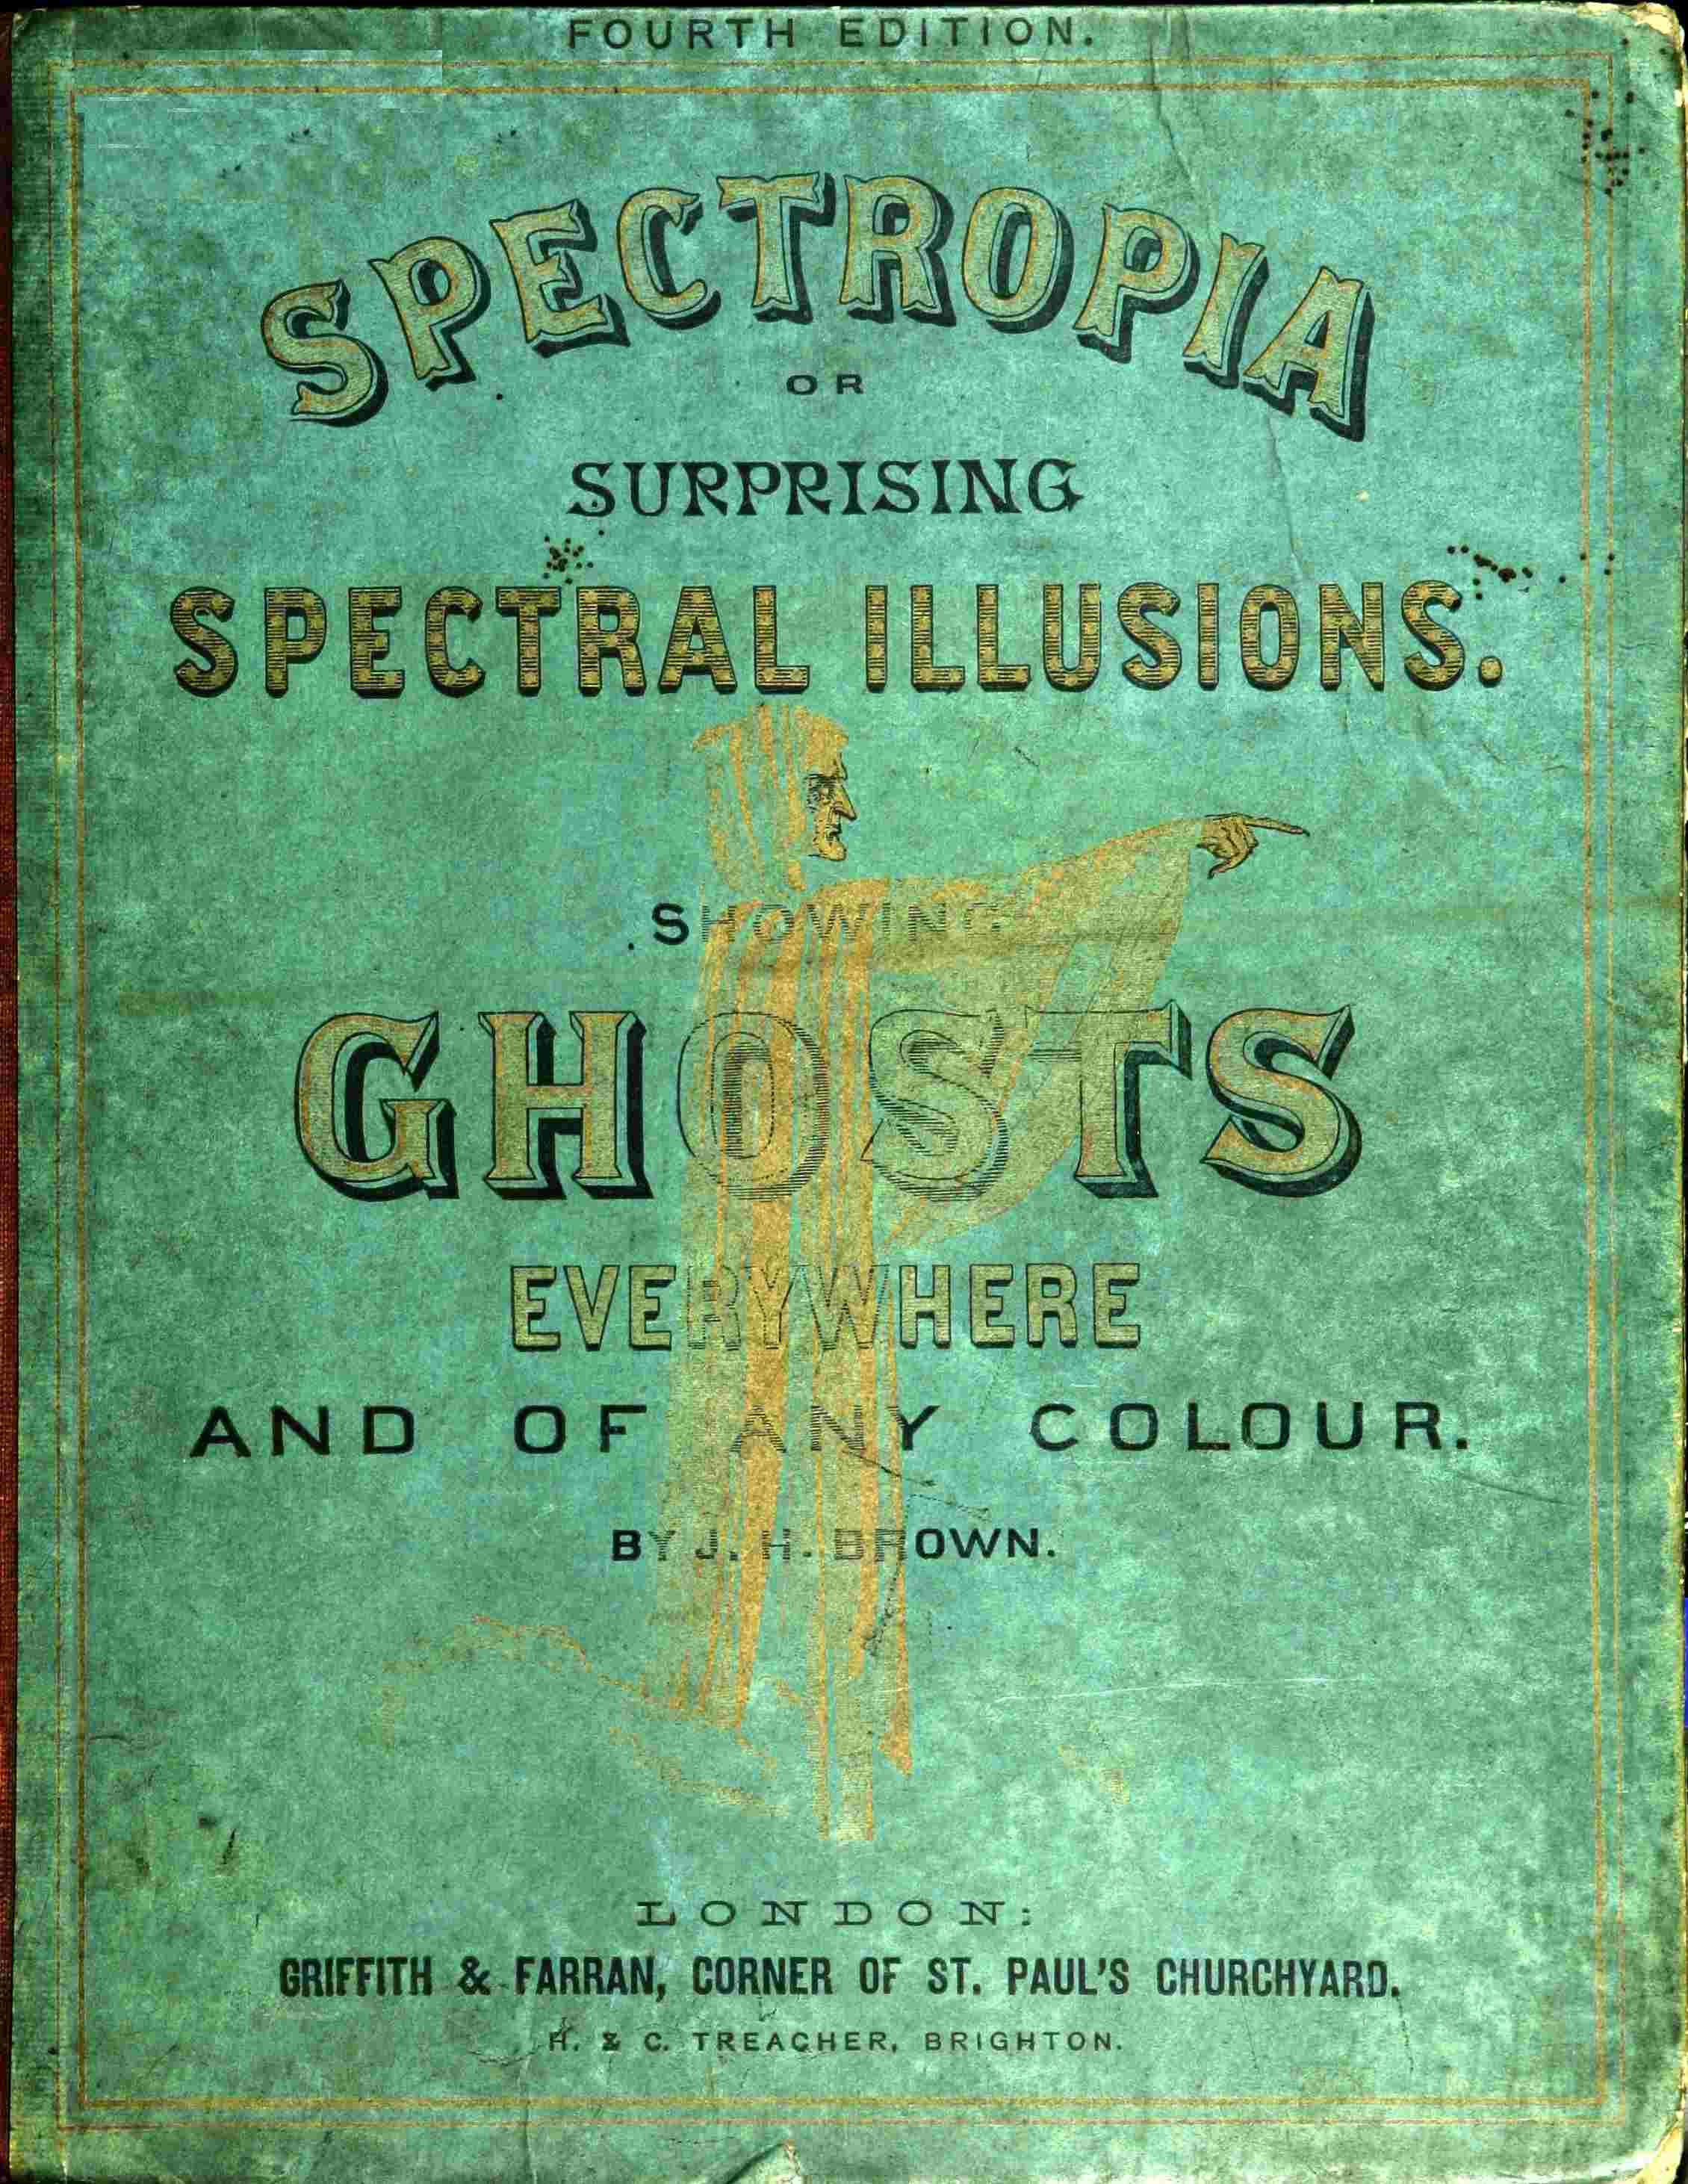 Spectropia; or, Surprising Spectral Illusions&#10;Showing Ghosts Everywhere, and of Any Colour